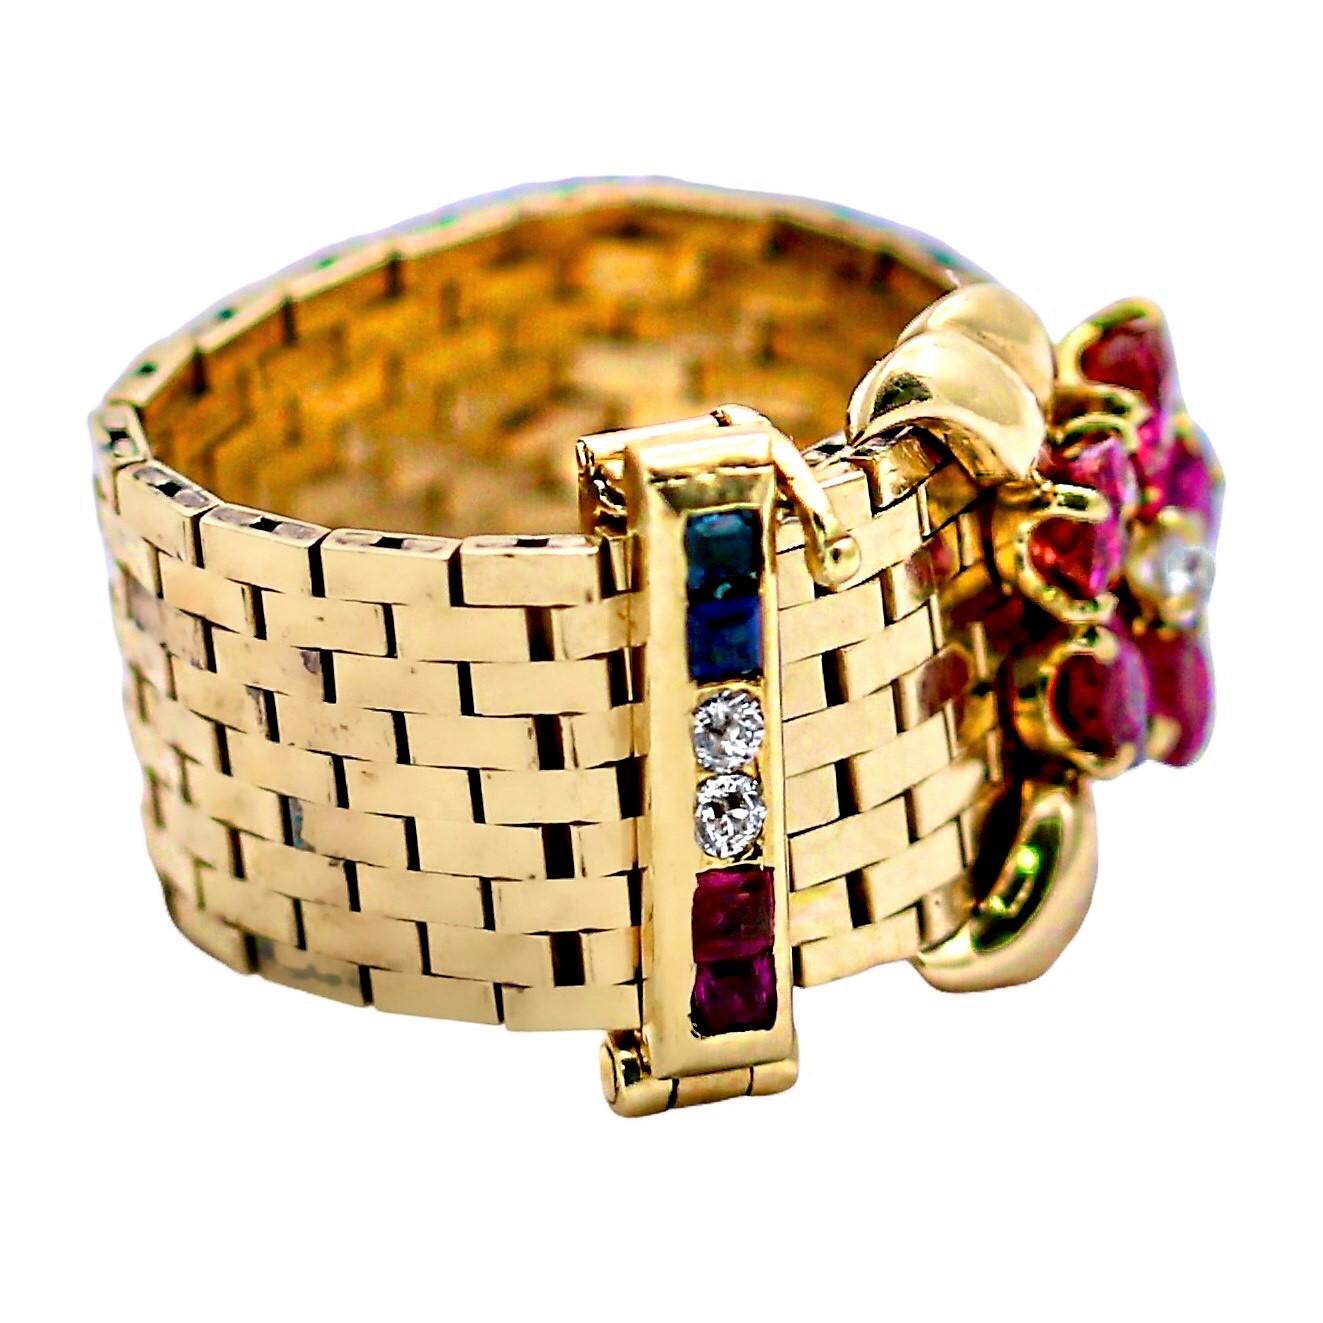 This 14k yellow gold Mid-20th Century American buckle ring is a bit unique. Most terminate in a point which is typically set with precious stones but this one is adorned with a natural ruby floret at it's tip. Additionally, the flip clasp is set